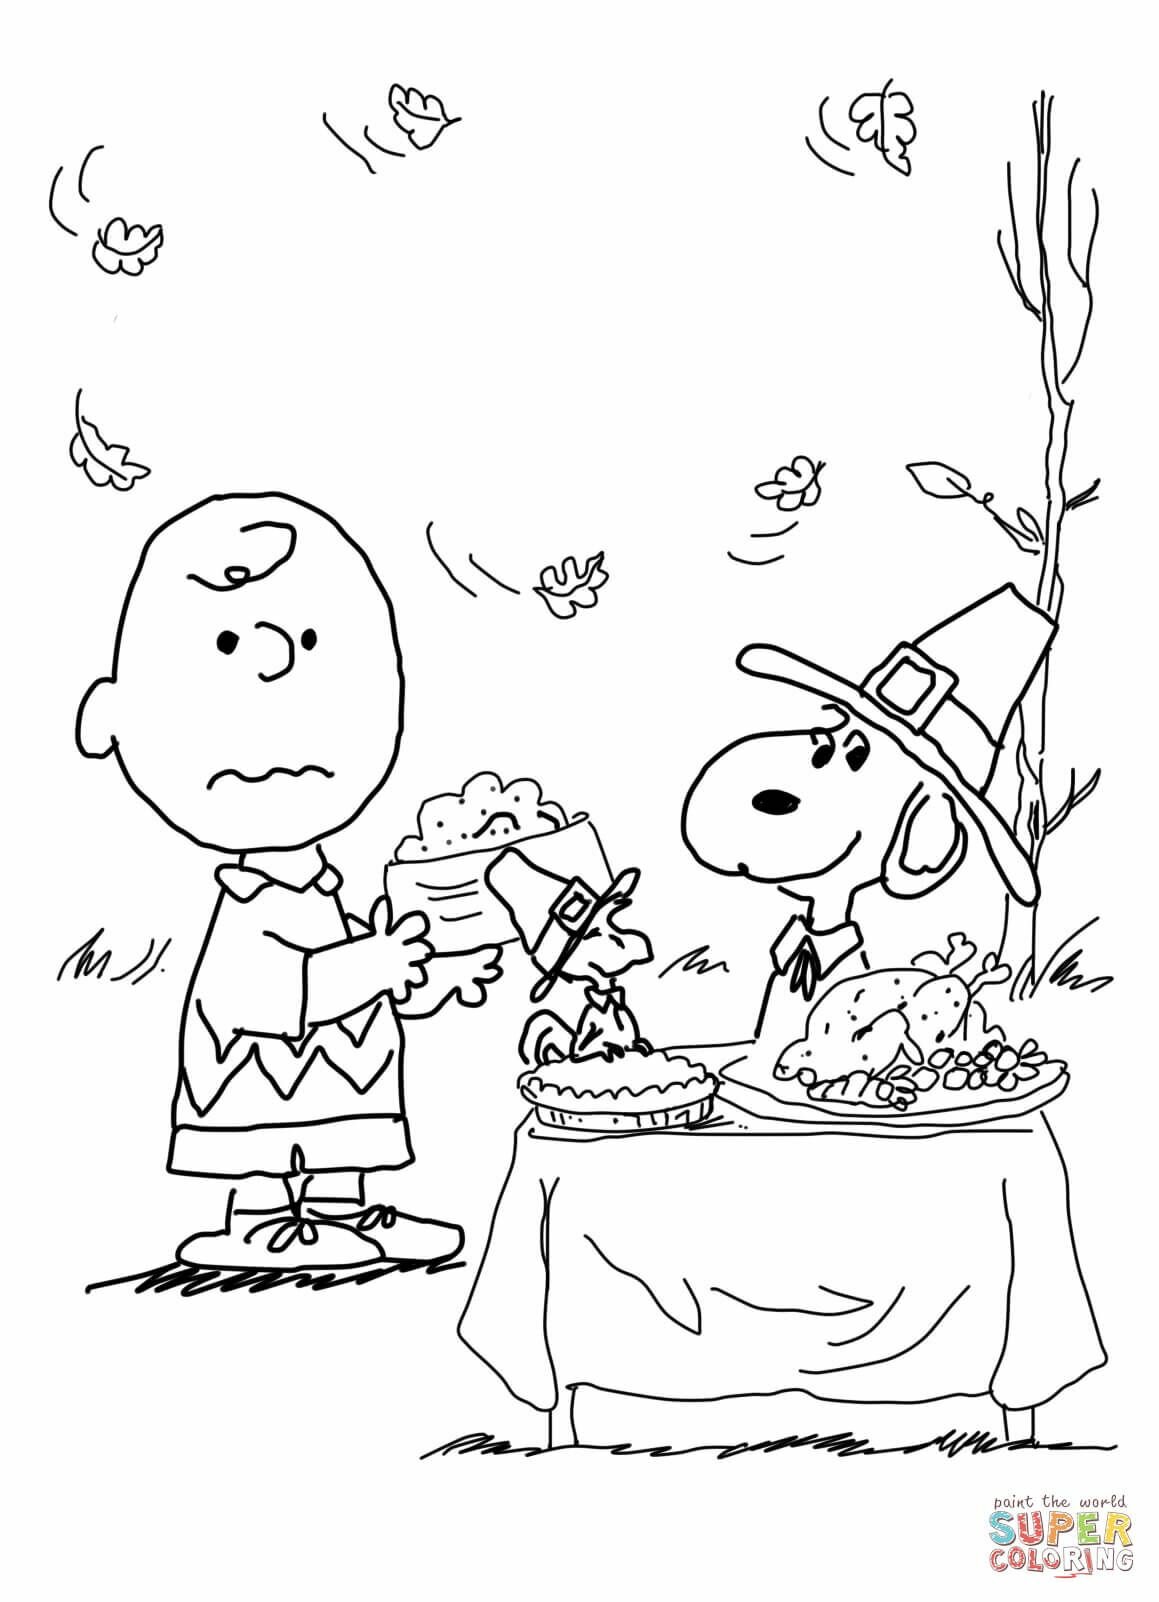 spectacular charlie brown thanksgiving coloring page free printable coloring pages free christian coloring pages for thanksgiving 